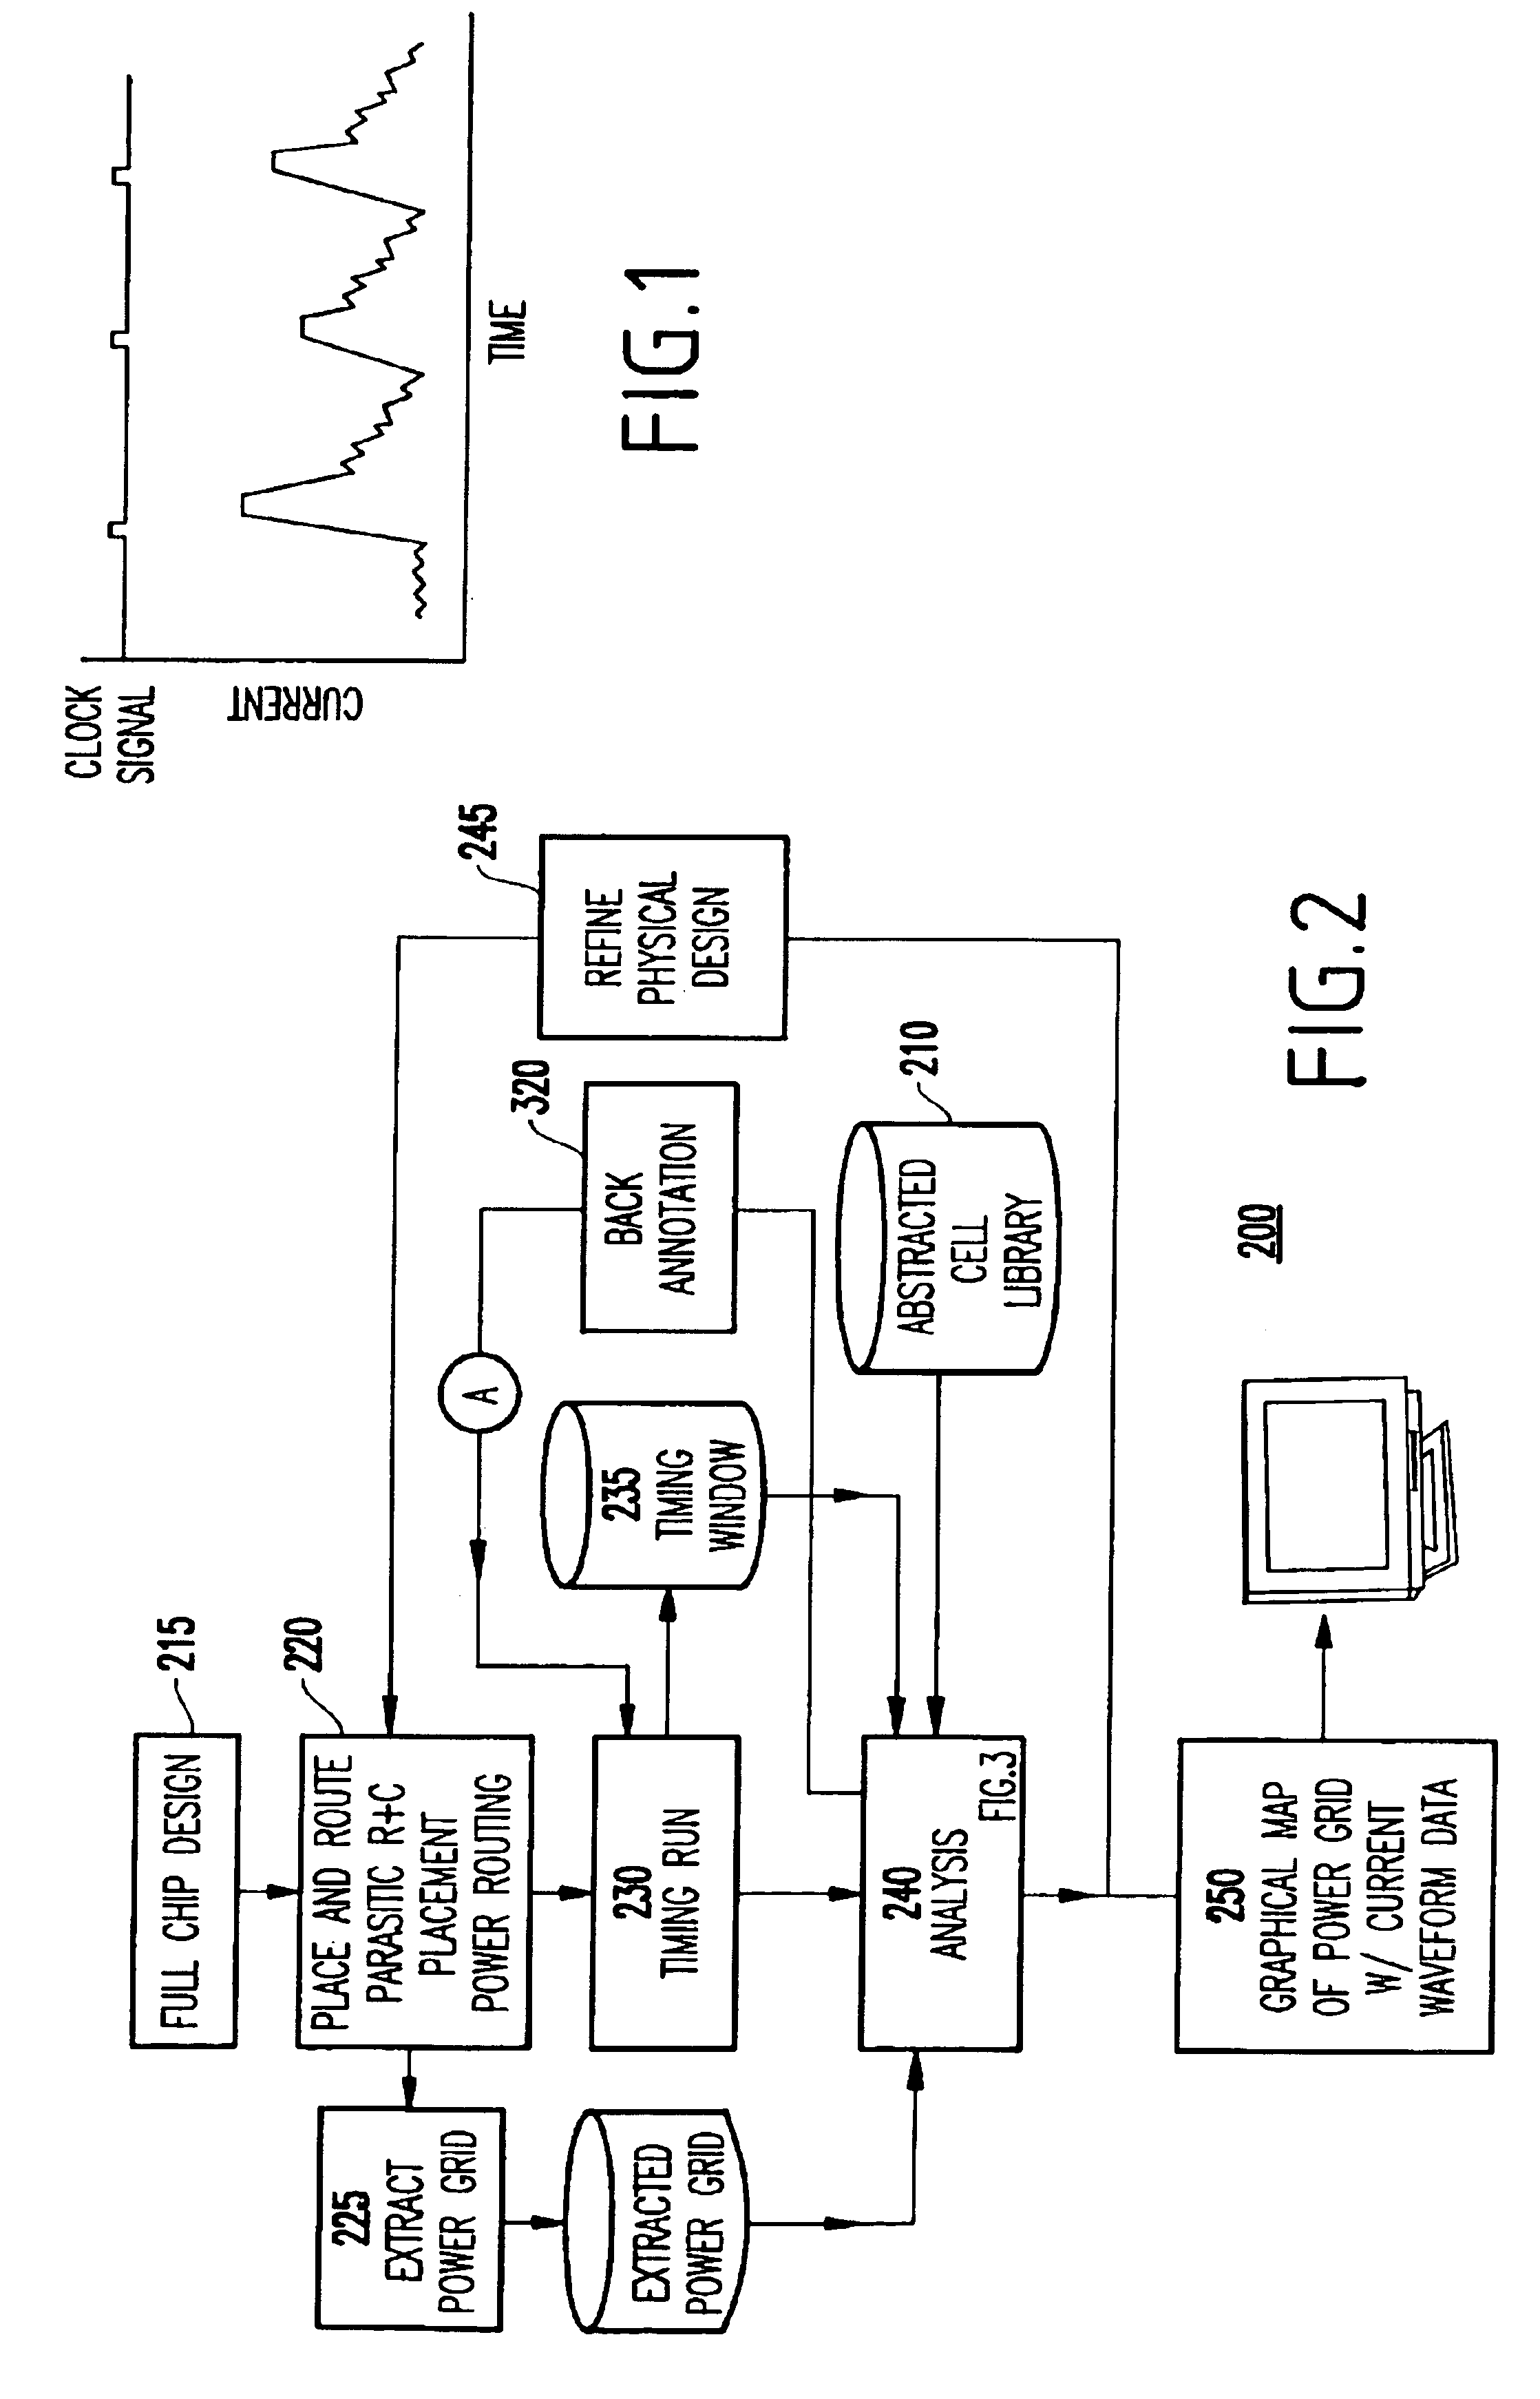 System and method for analyzing power distribution using static timing analysis